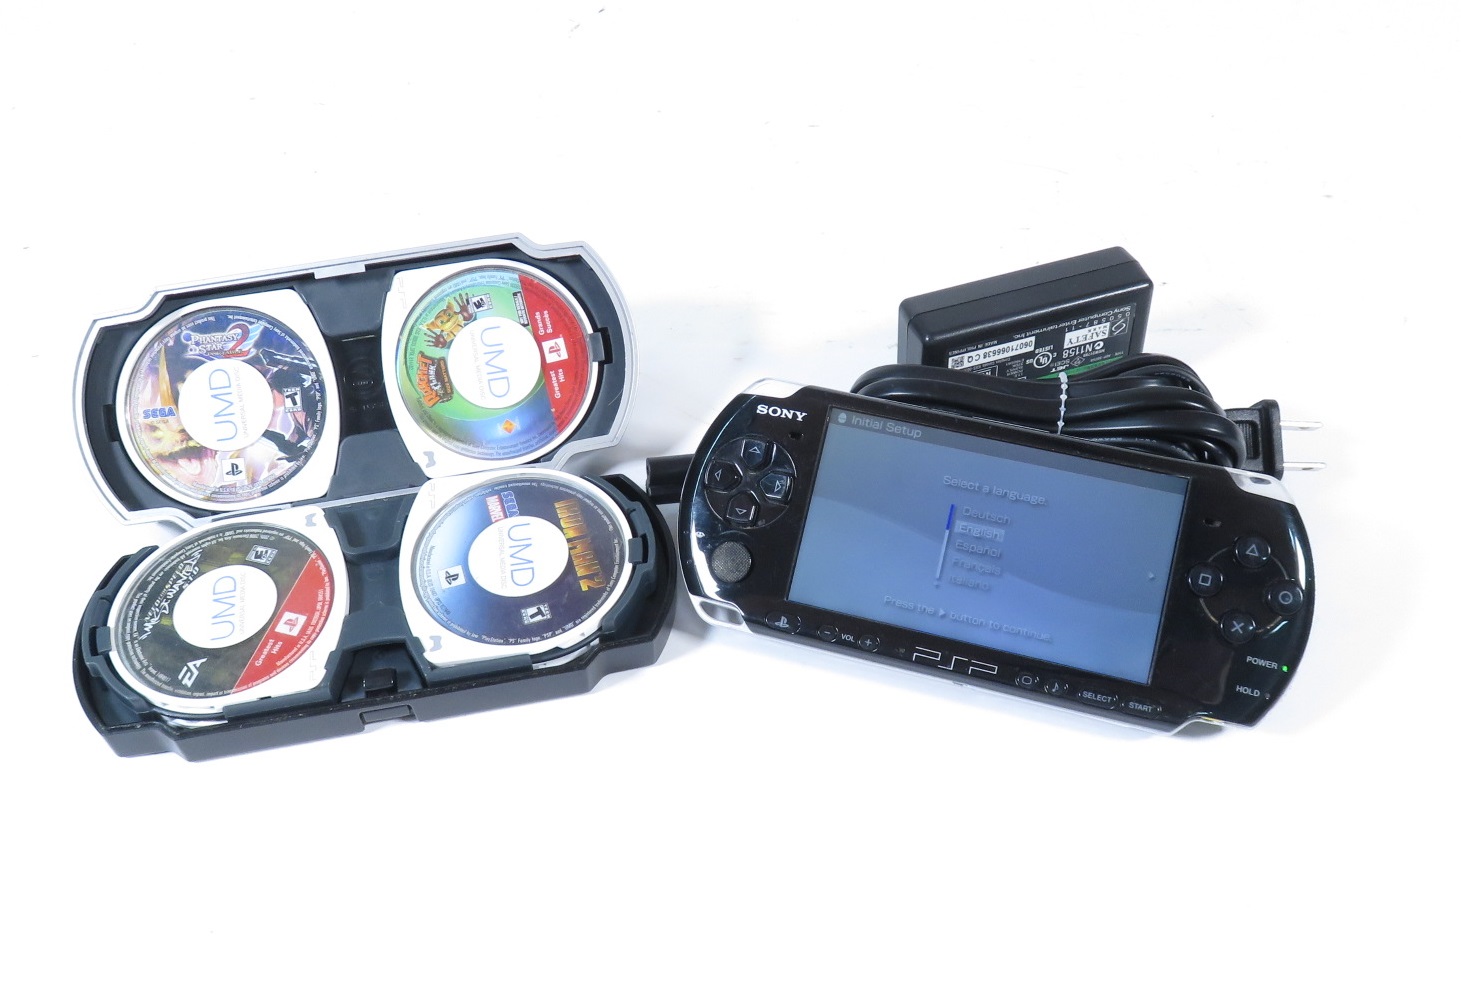 Sony PlayStation Portable PSP-3001 LCD Portable Compact, 59% OFF